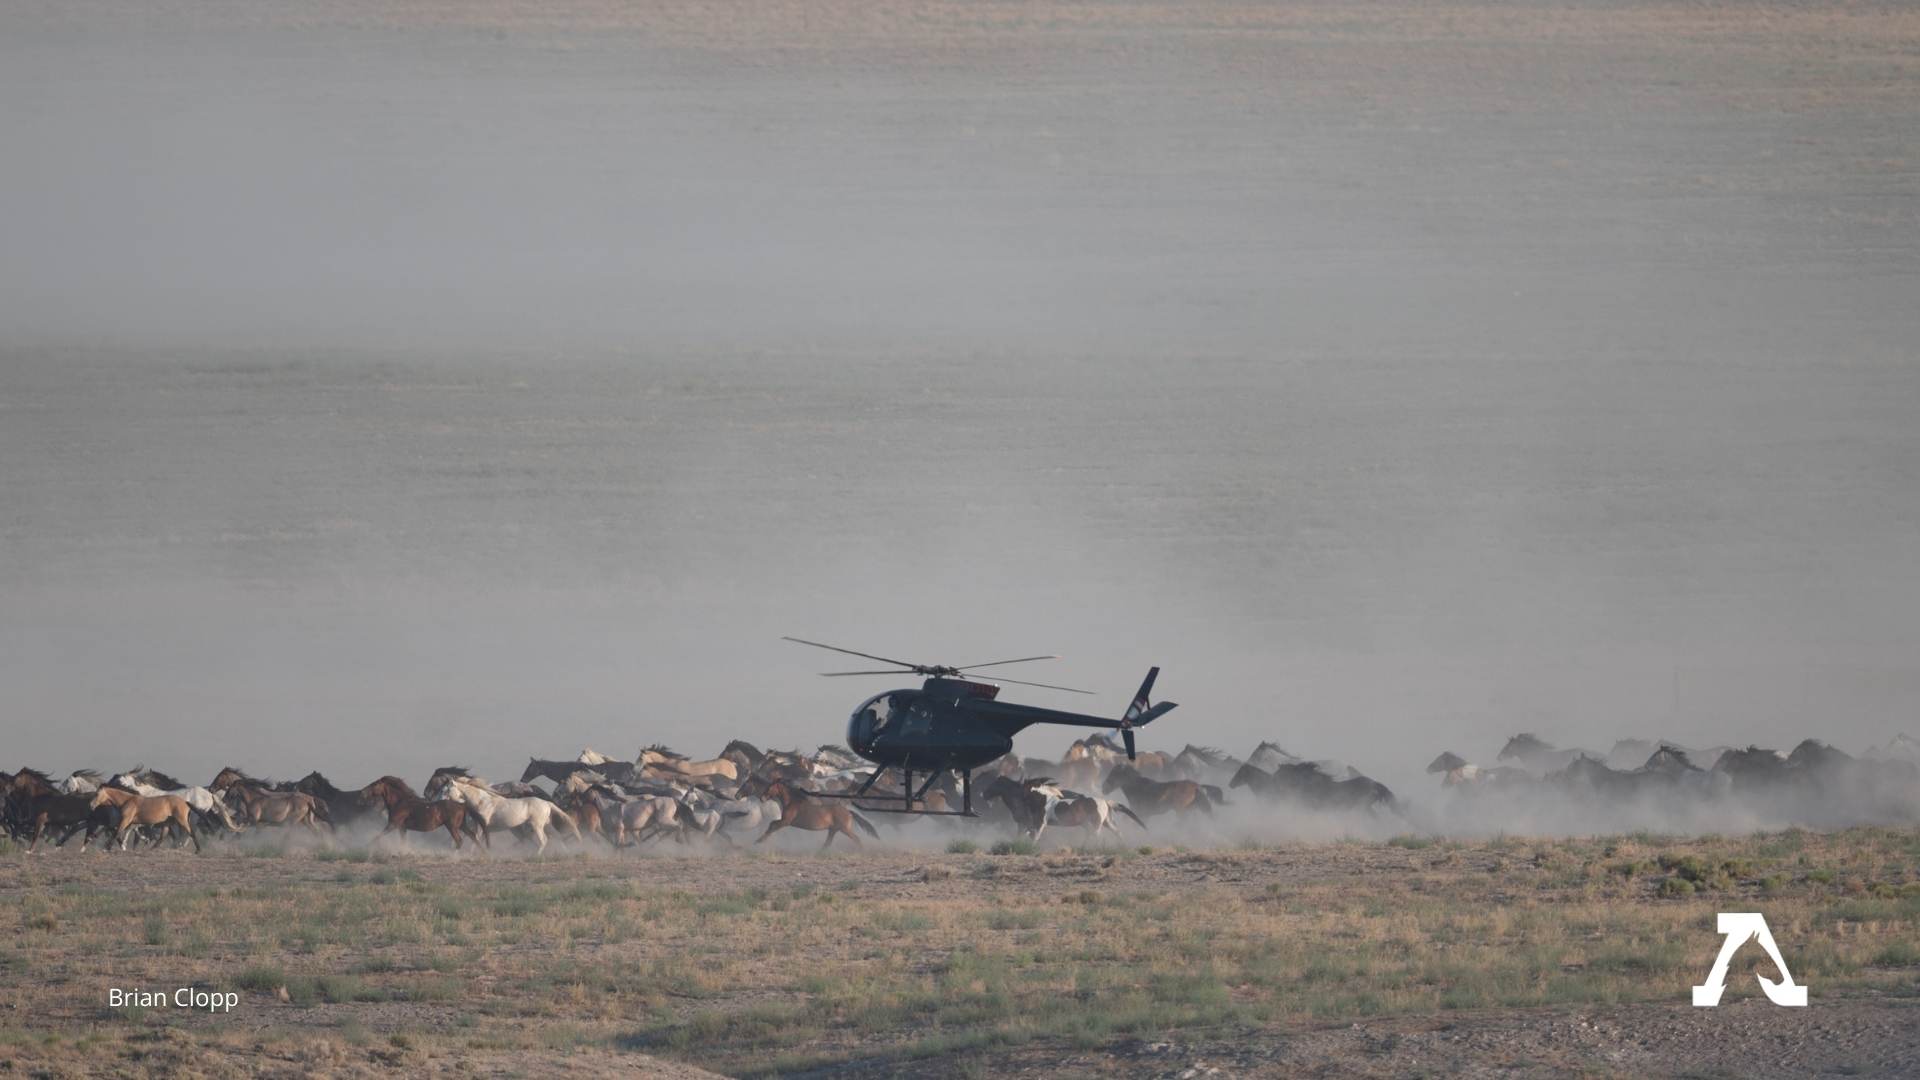 New perspective of devastating impacts of helicopter on wild horses during roundups american wild horse campaign